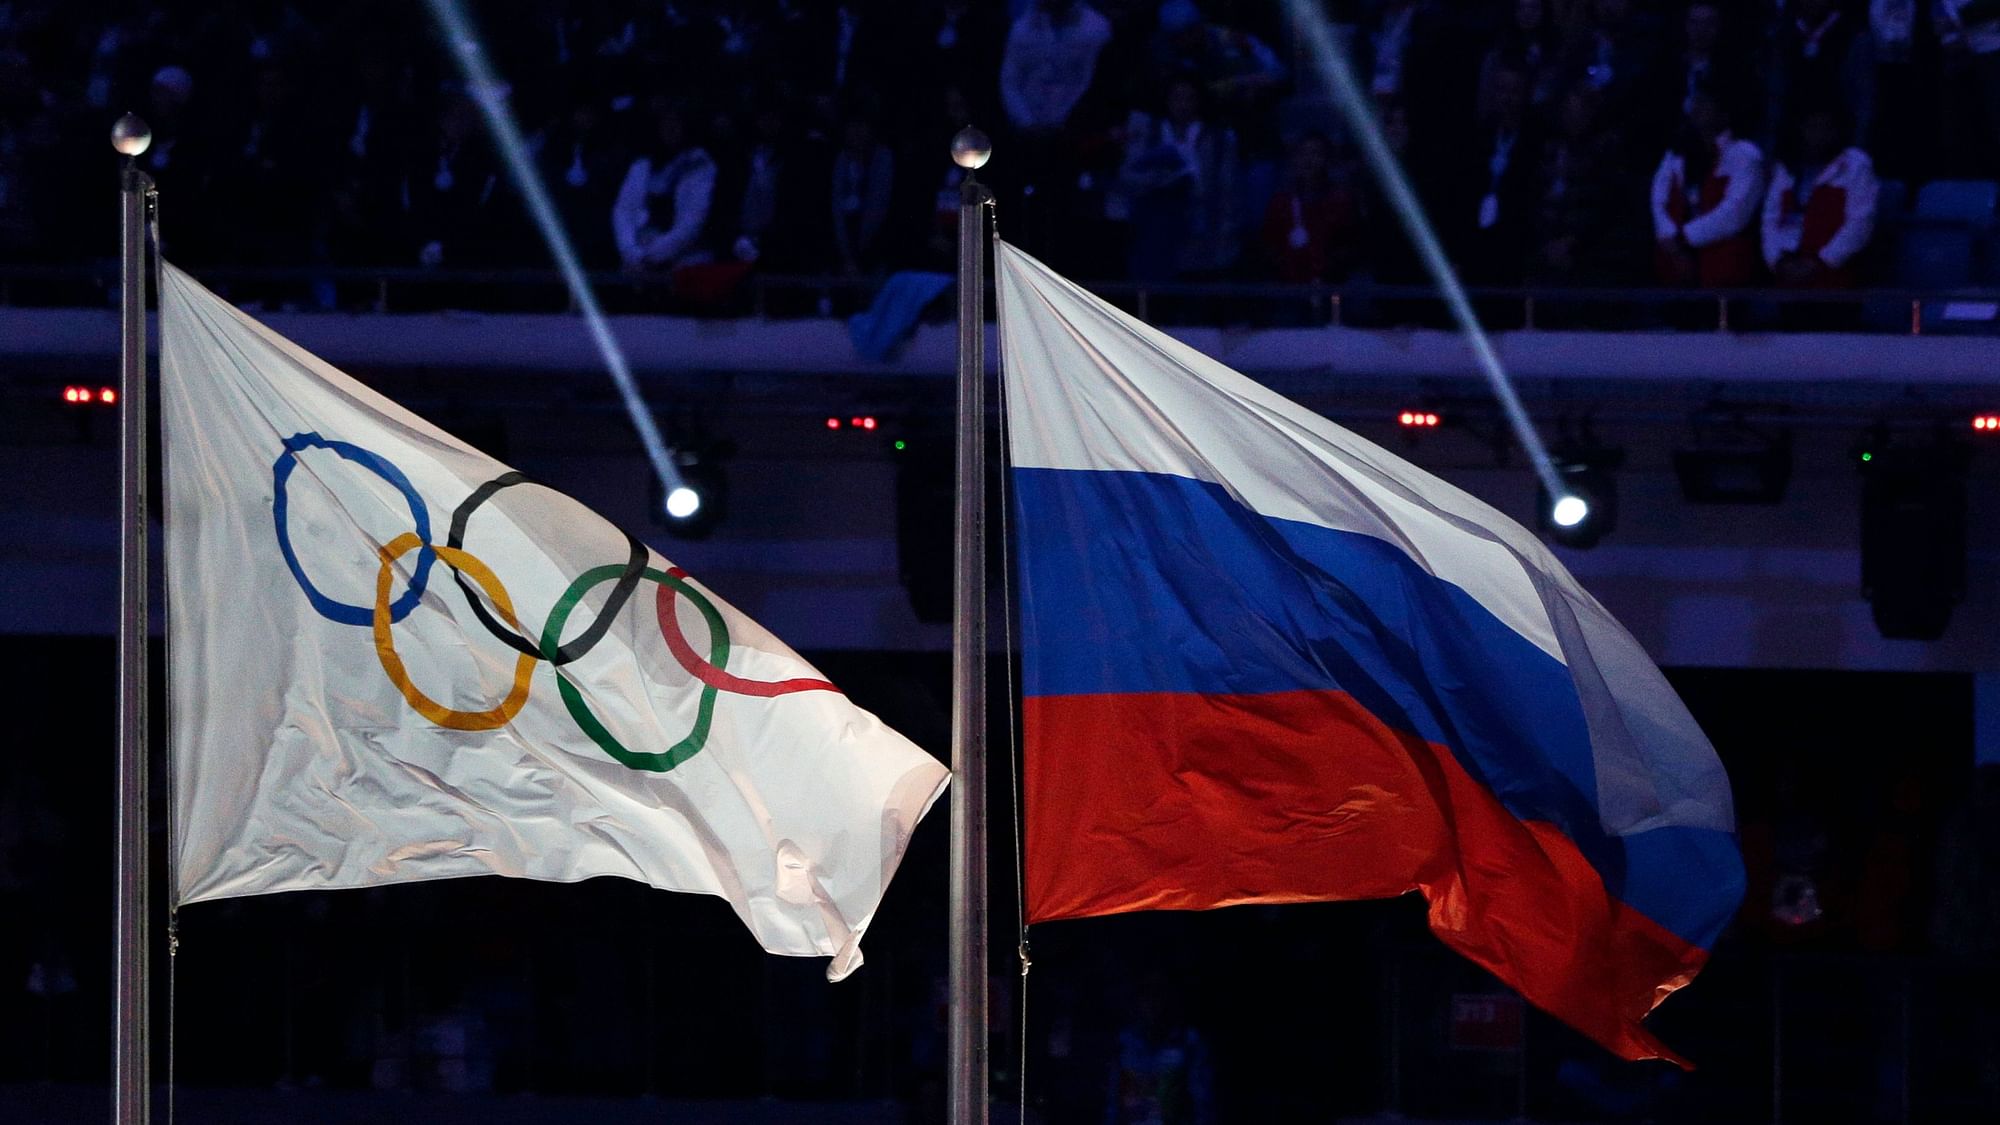 The Court of Arbitration for Sport (CAS) has reduced Russia’s initial four-year ban, imposed by the World Anti-Doping Agency (WADA), to two years.